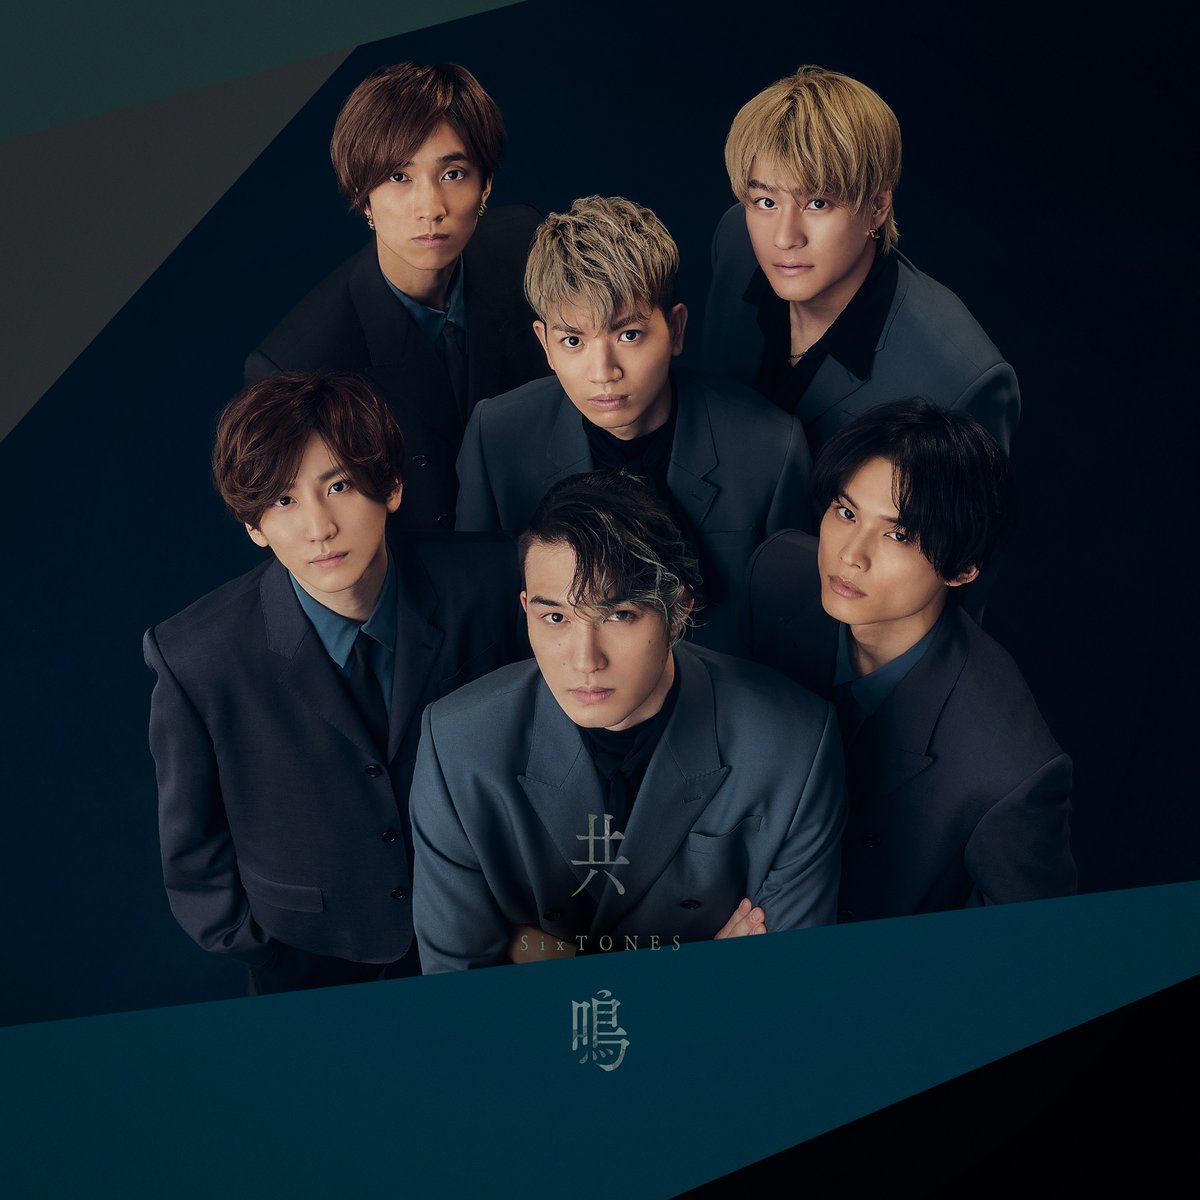 Cover for『SixTONES - FASHION』from the release『Kyoumei』